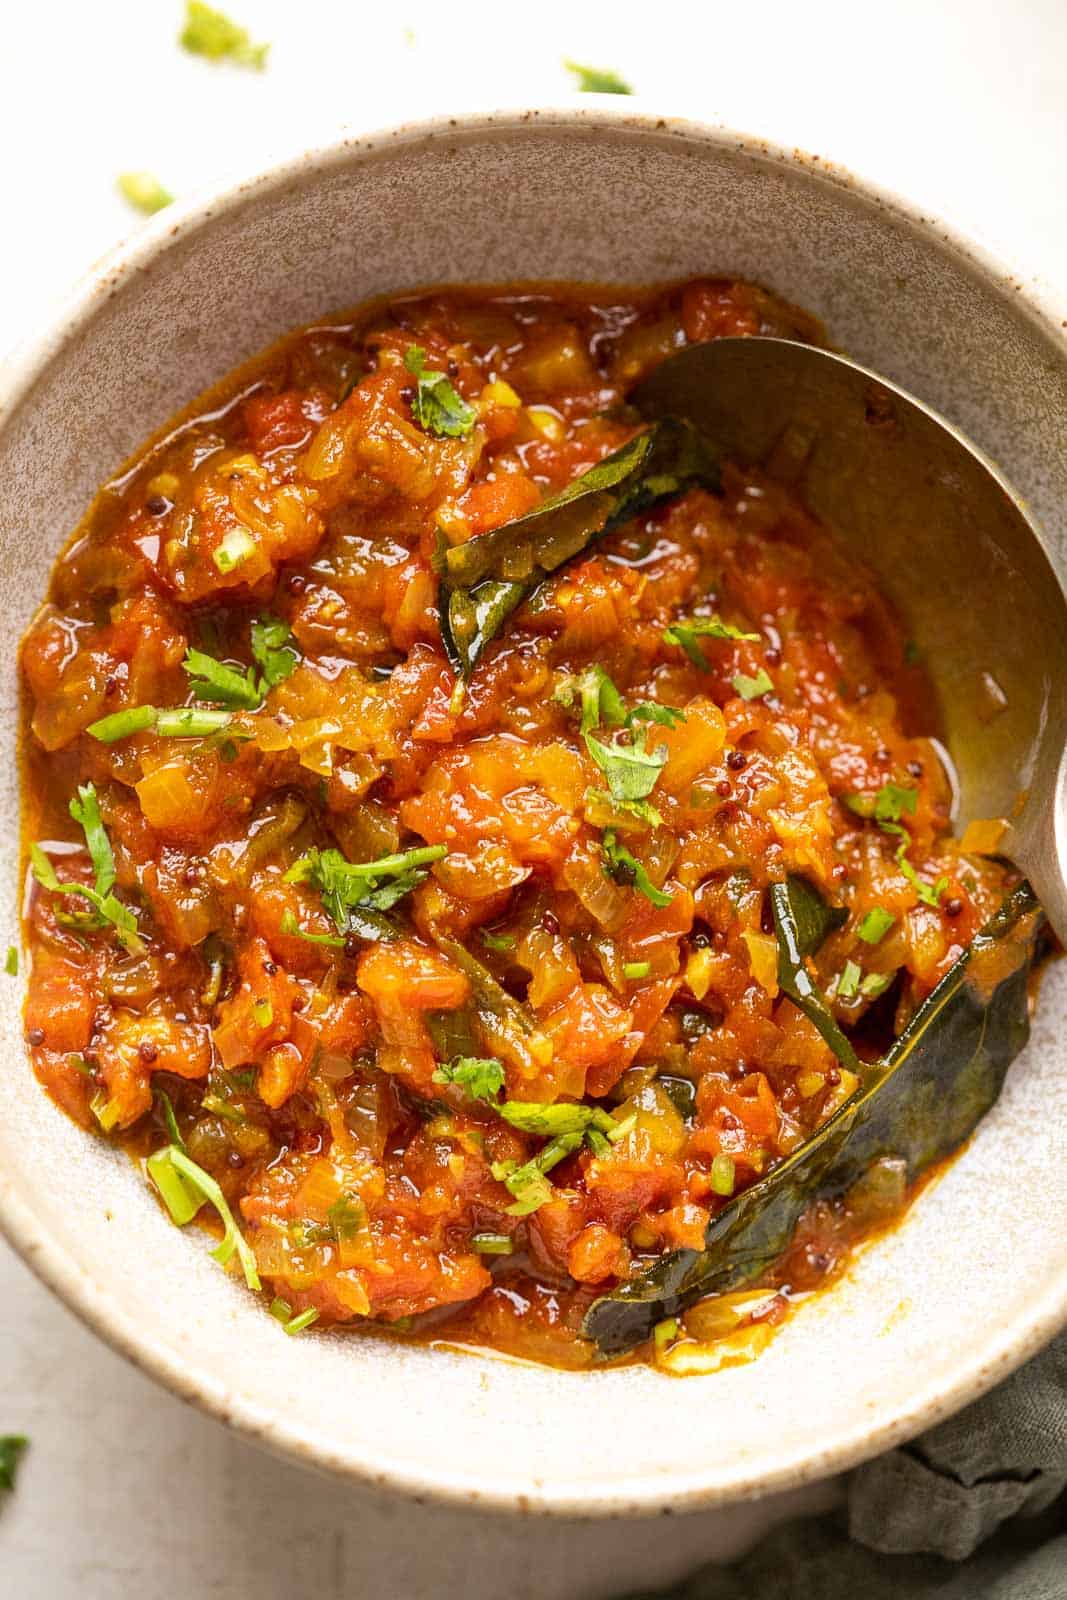 North Indian style tomato chutney served in a ceramic bowl with a spoon on the side